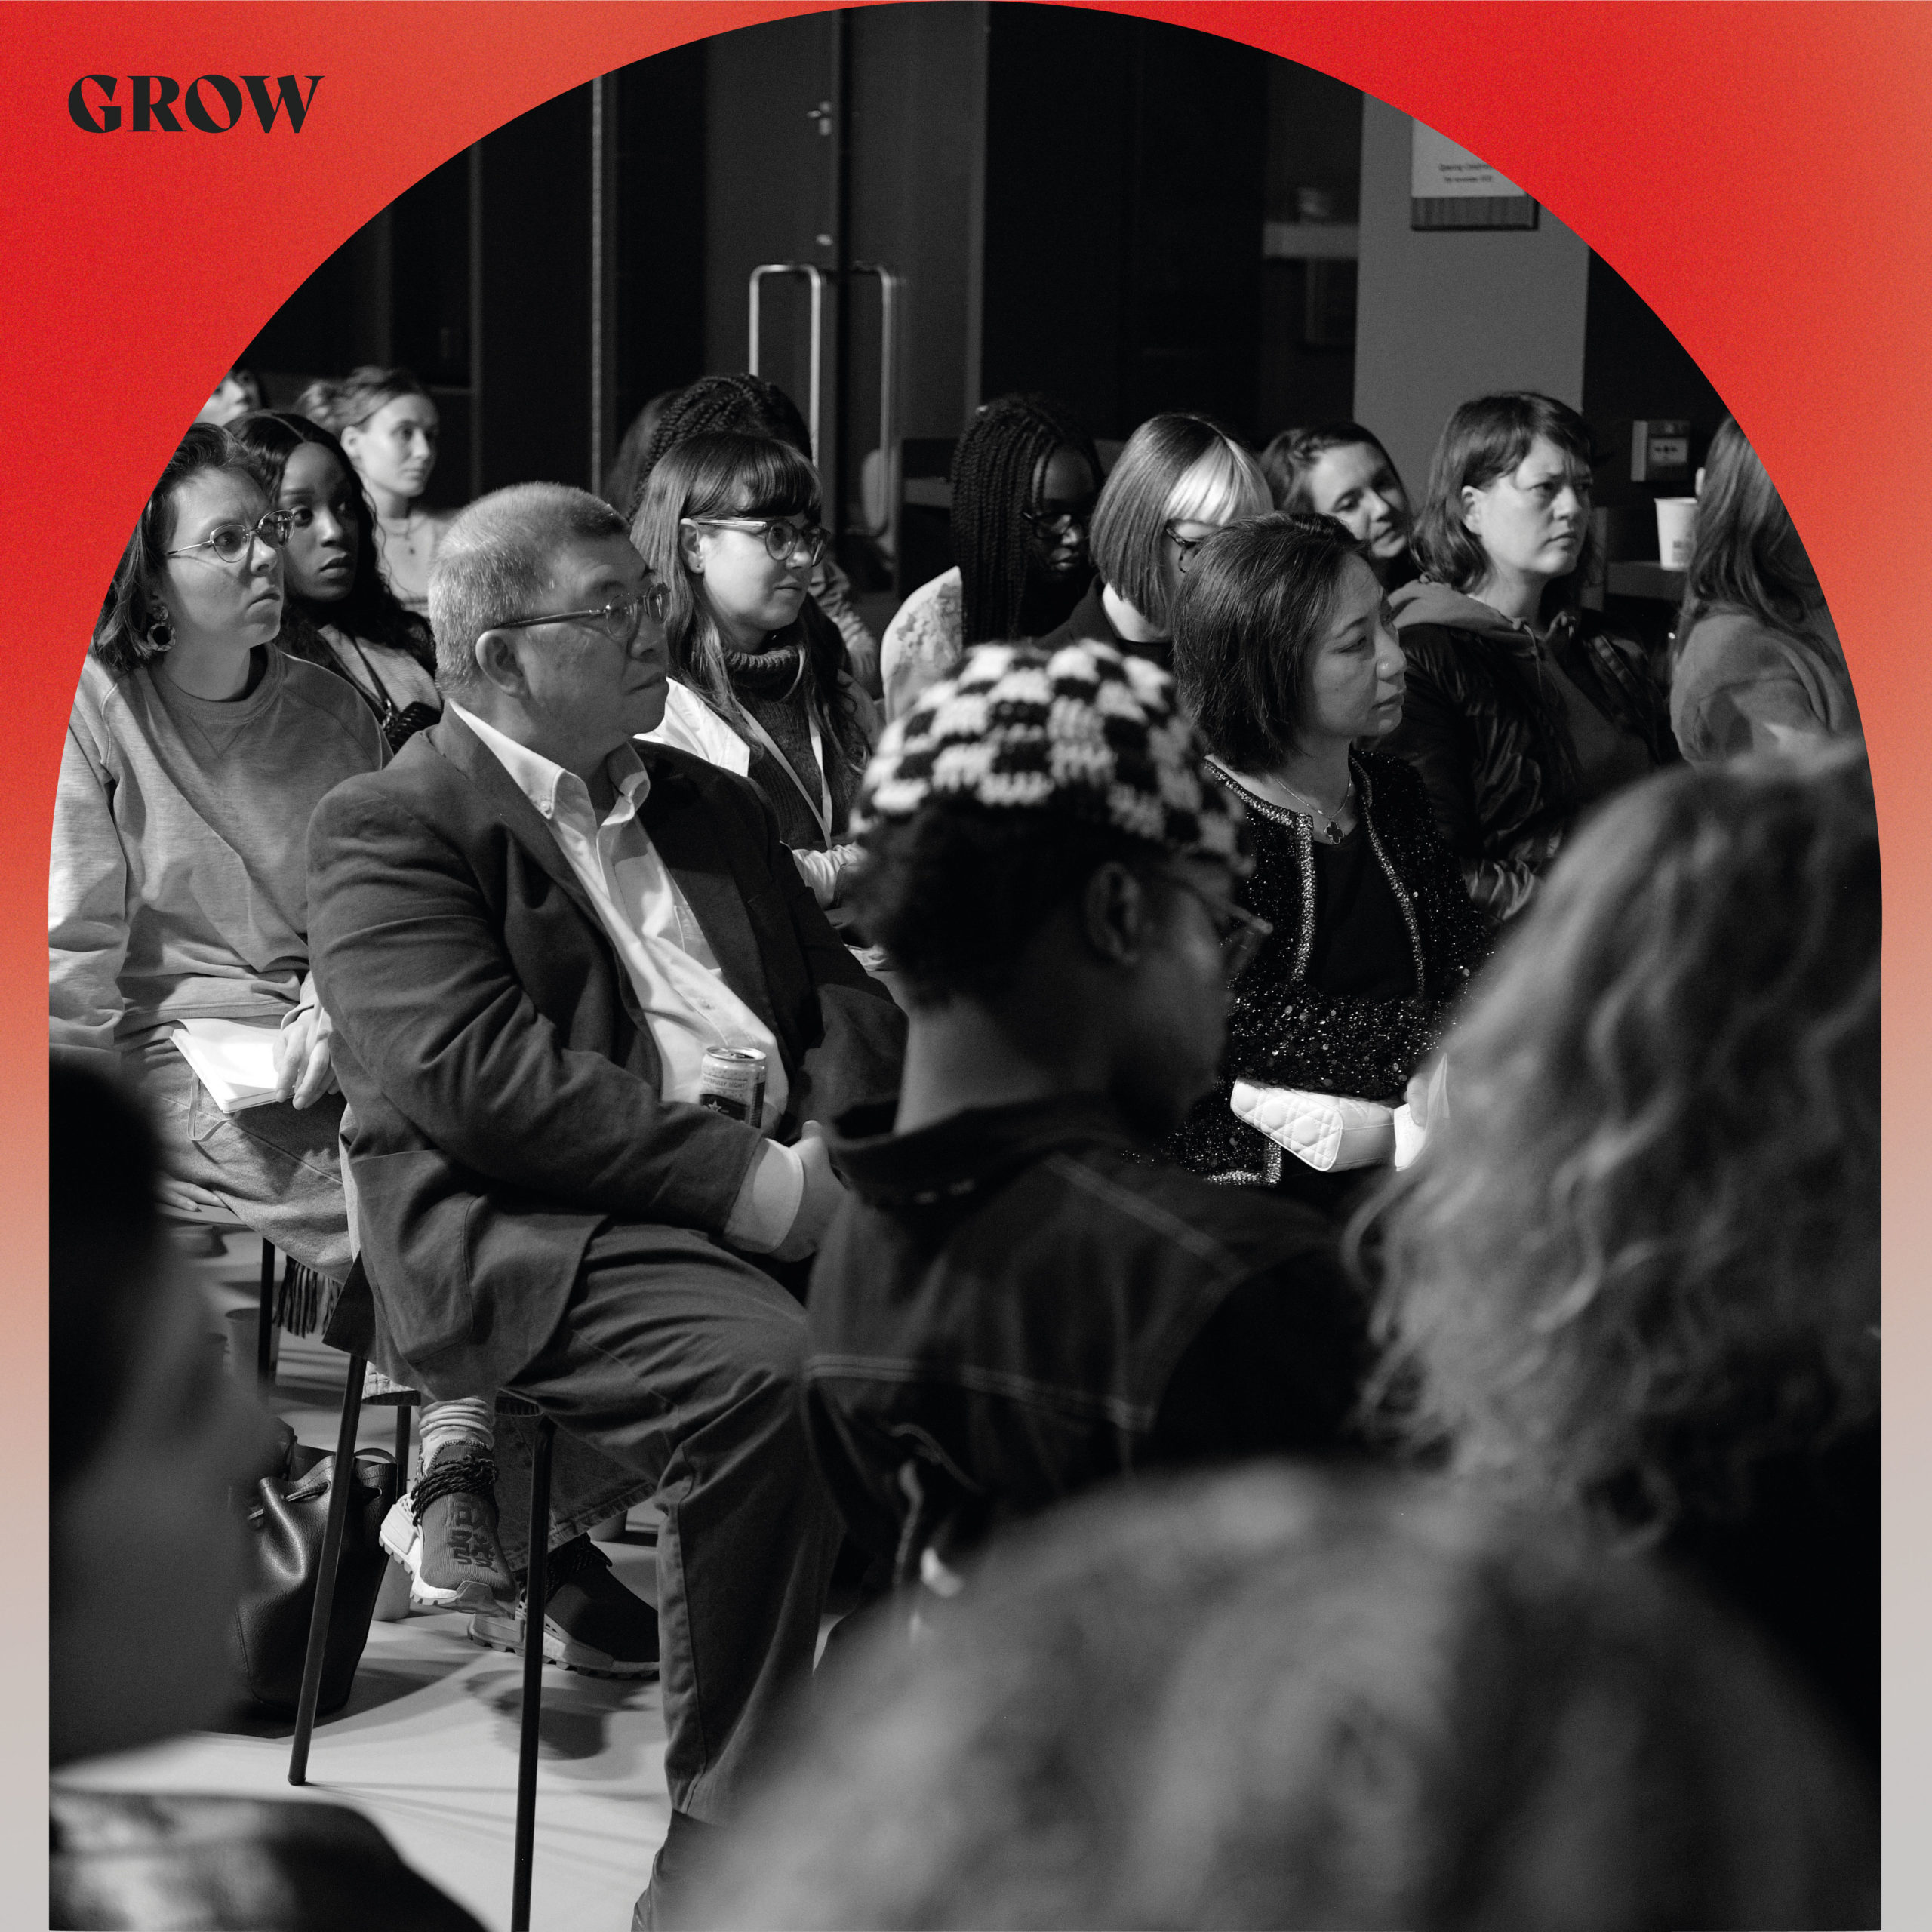 GROW – Fashion Circle: Altering Perspectives